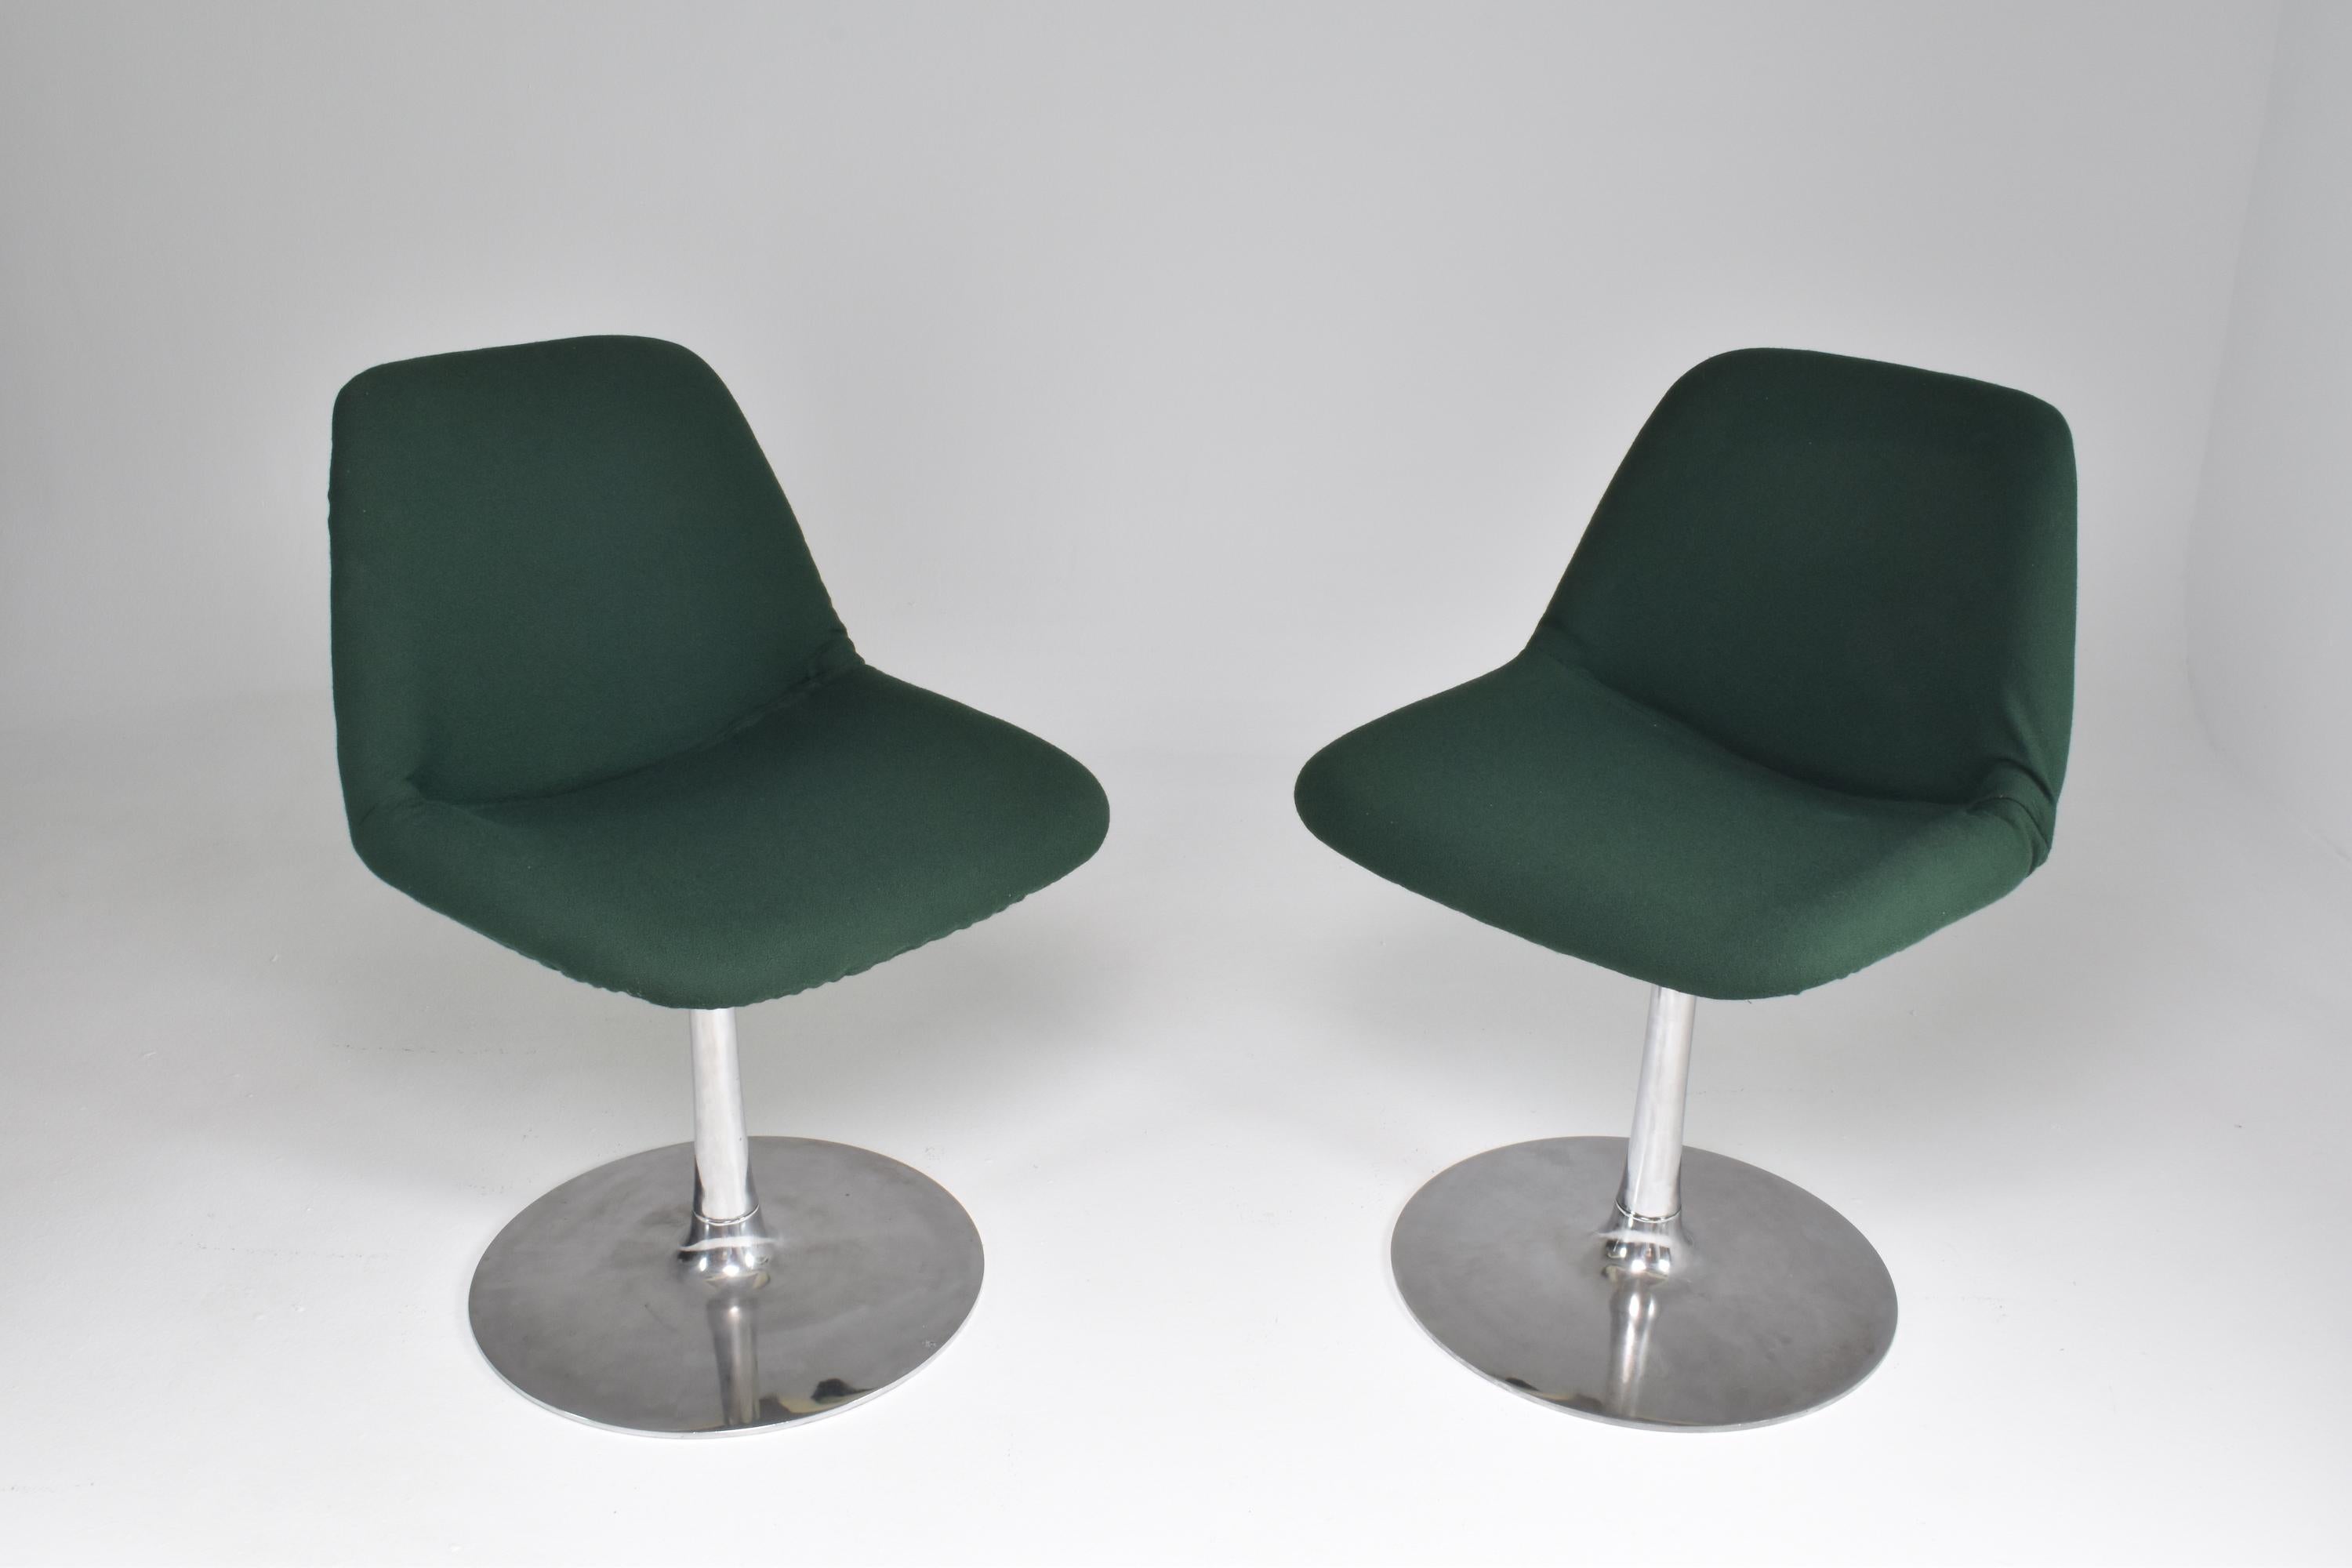 A super stylish pair of 20th-century vintage chairs in expertly restored condition by the notable English designer Robin Day in the 1970s. 
This model is designed with a single leg crafted out of aluminum and the seating is molded from resin and